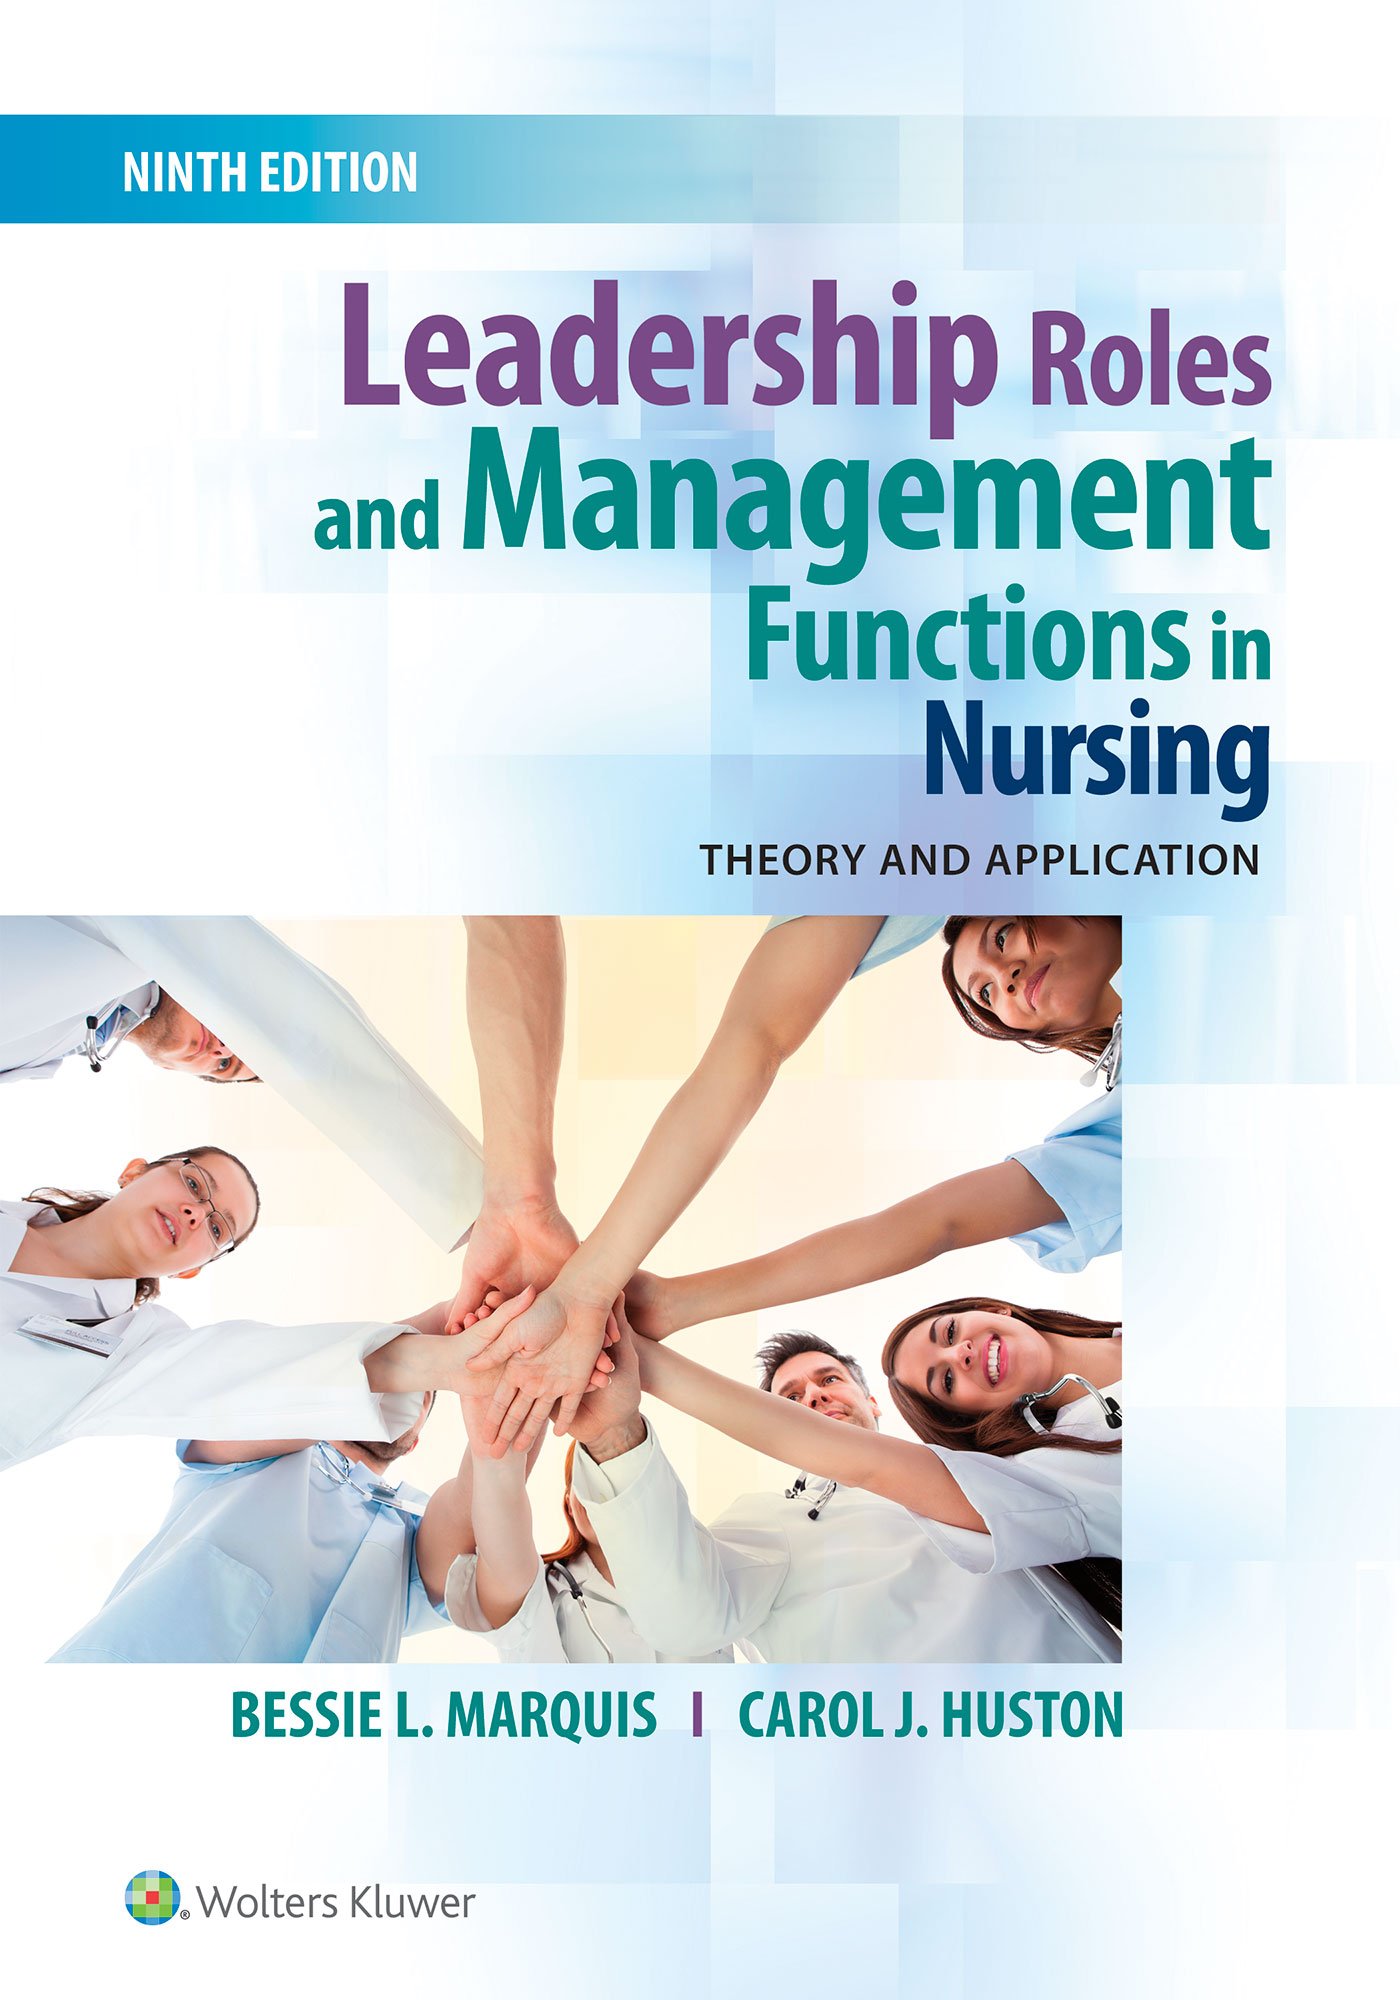 Leadership roles and management functions in nursing : theory and application